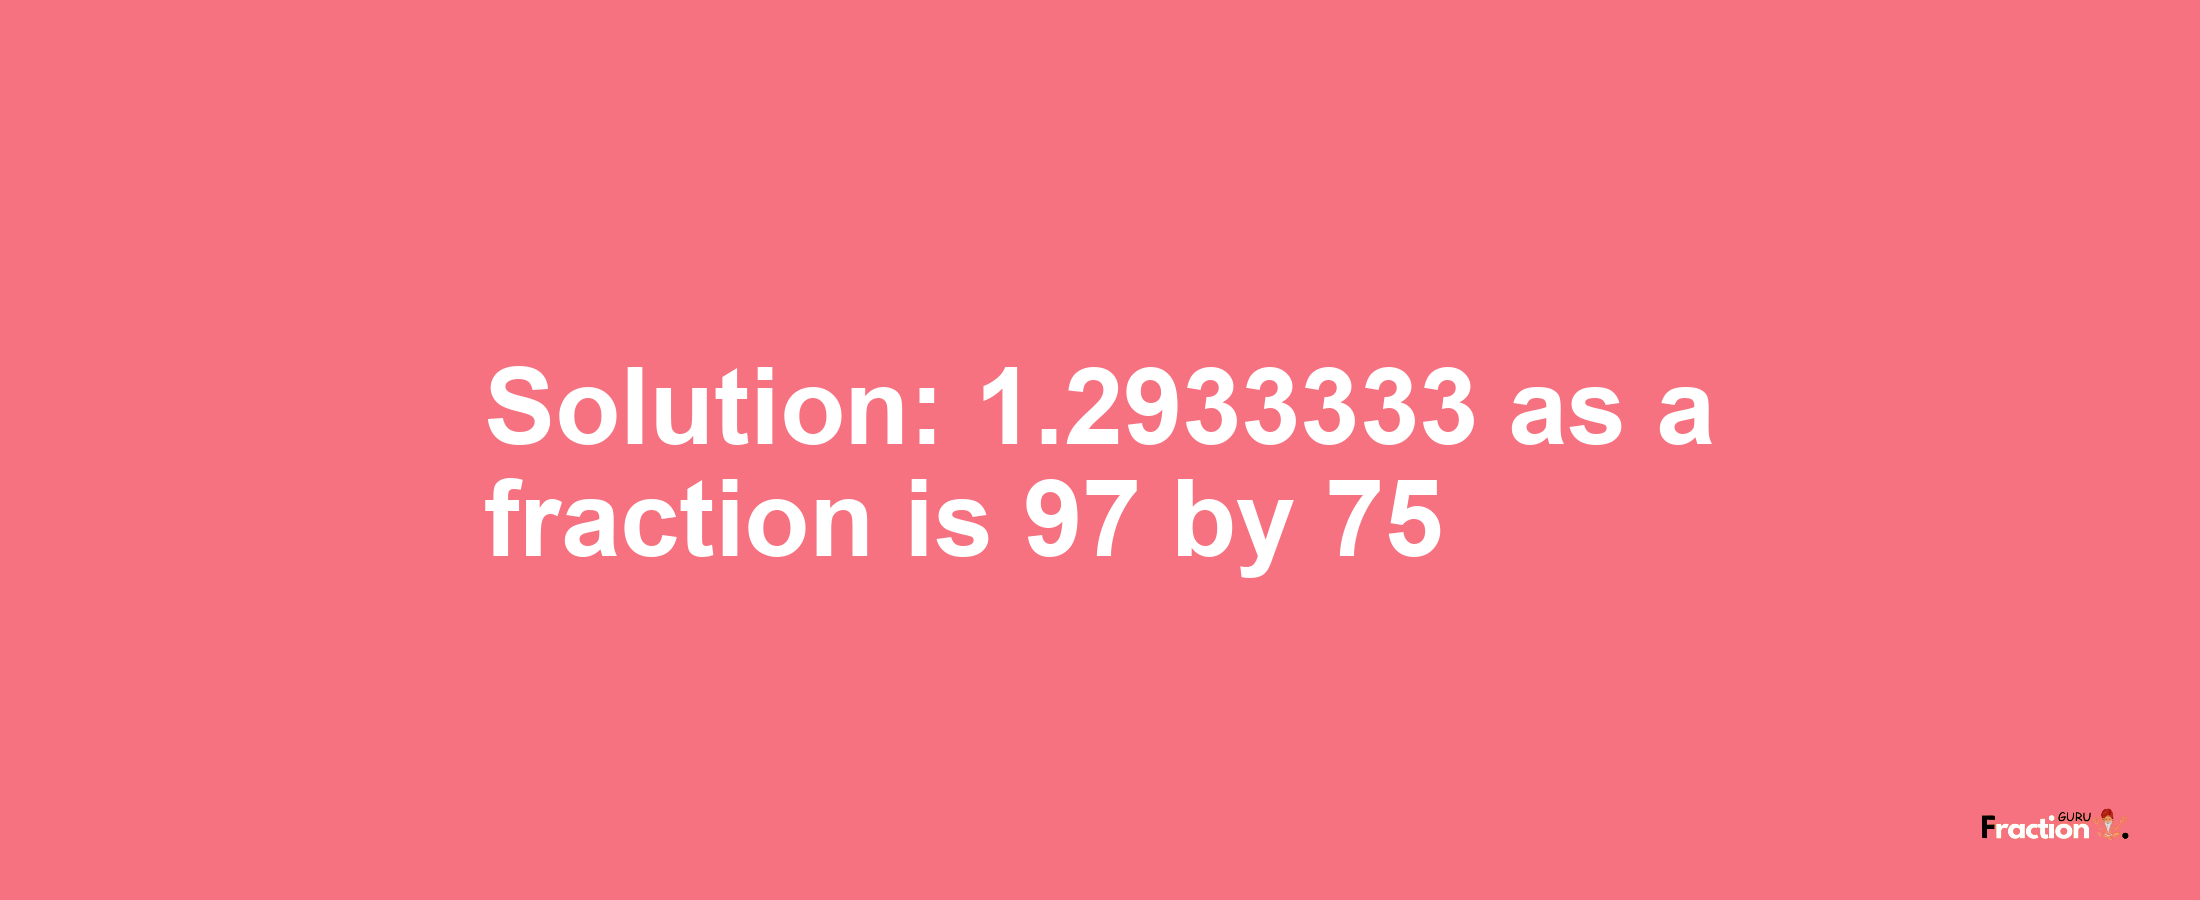 Solution:1.2933333 as a fraction is 97/75